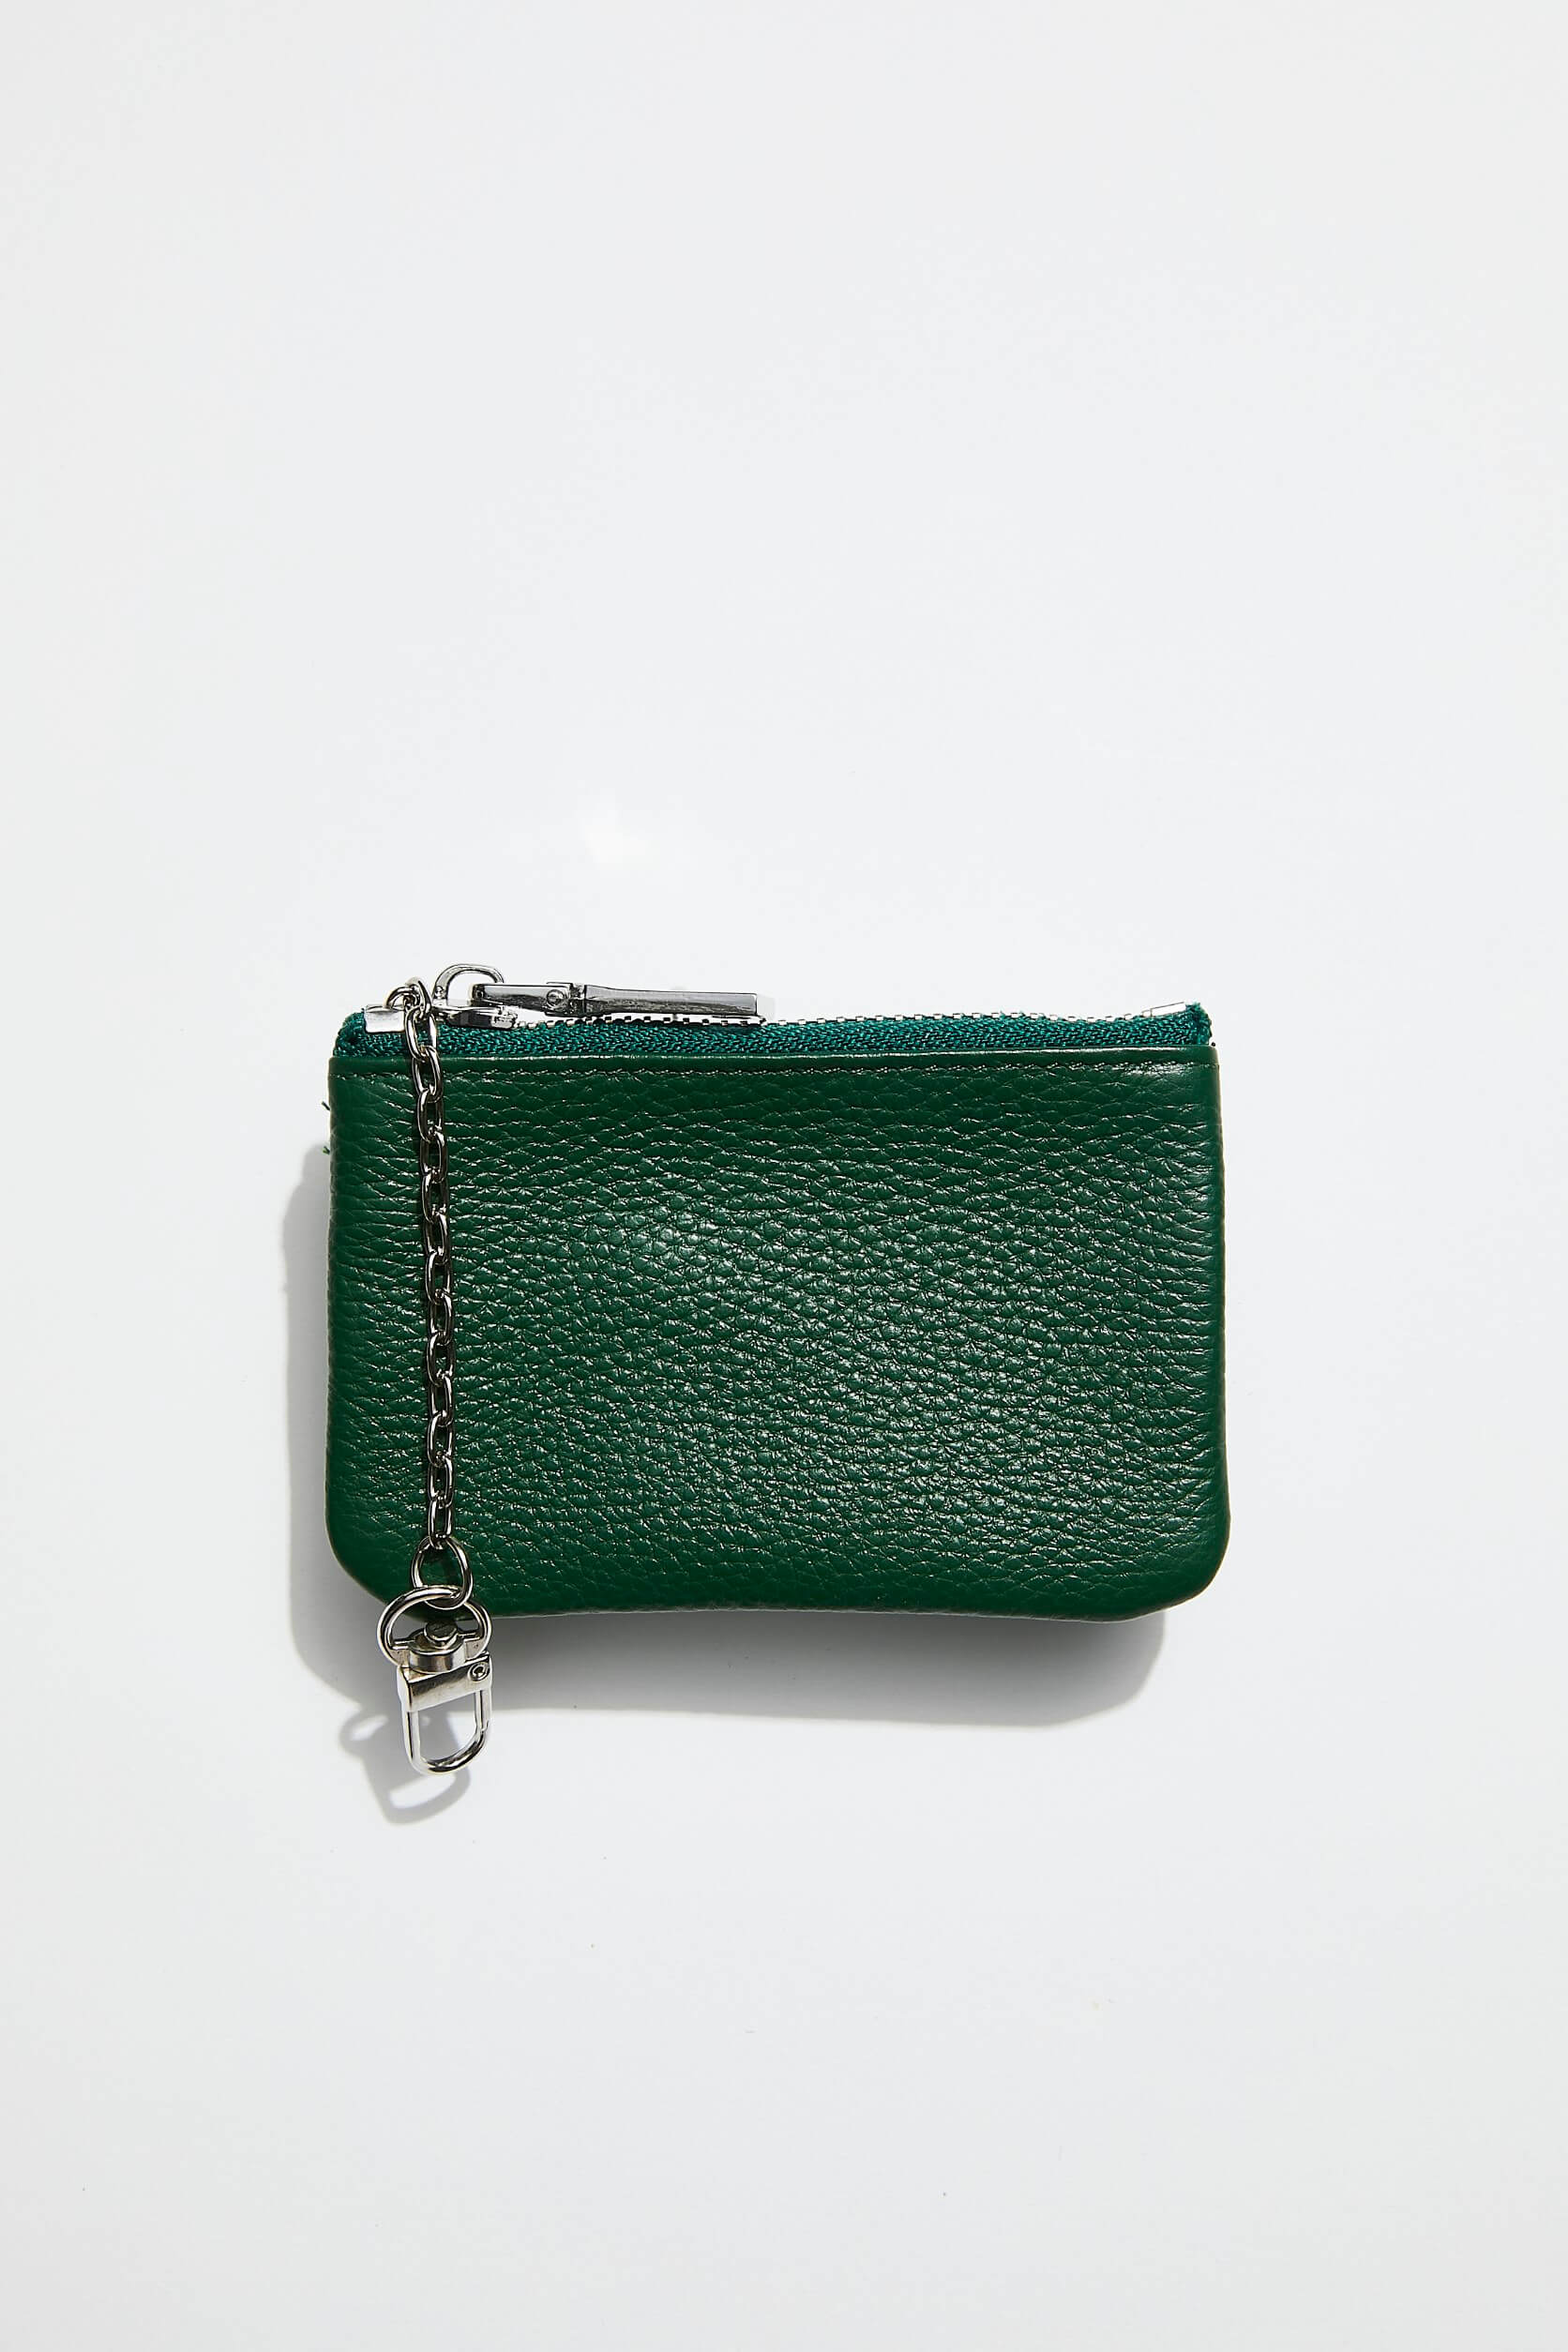 front view of mon purses' dark green pebbled green leather coin purse with silver zip an chain with clasp